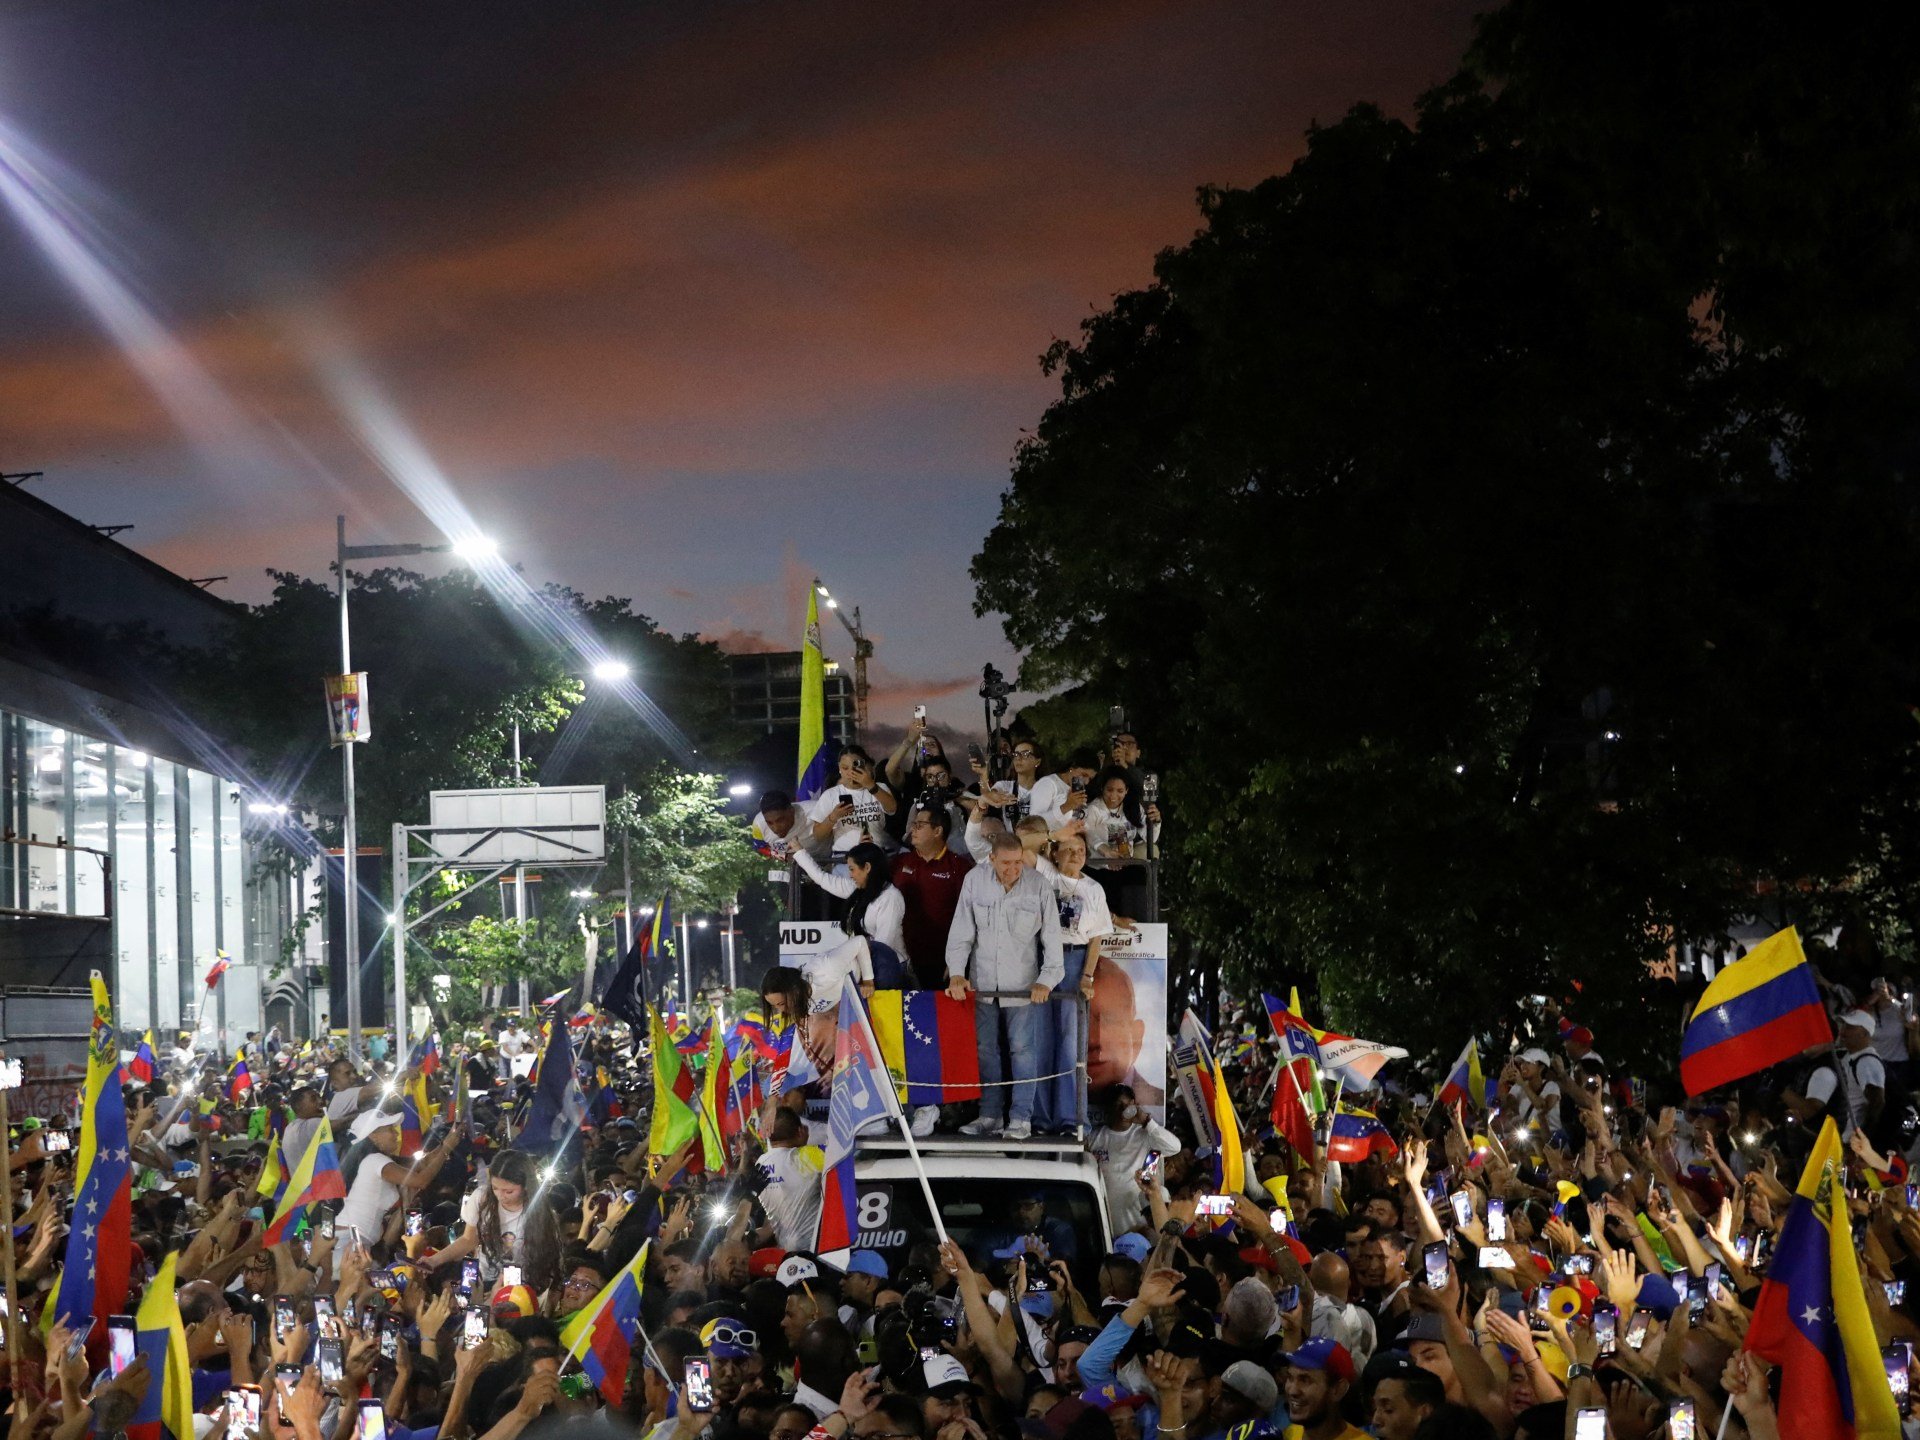 Huge crowds at Venezuela opposition’s final election rally